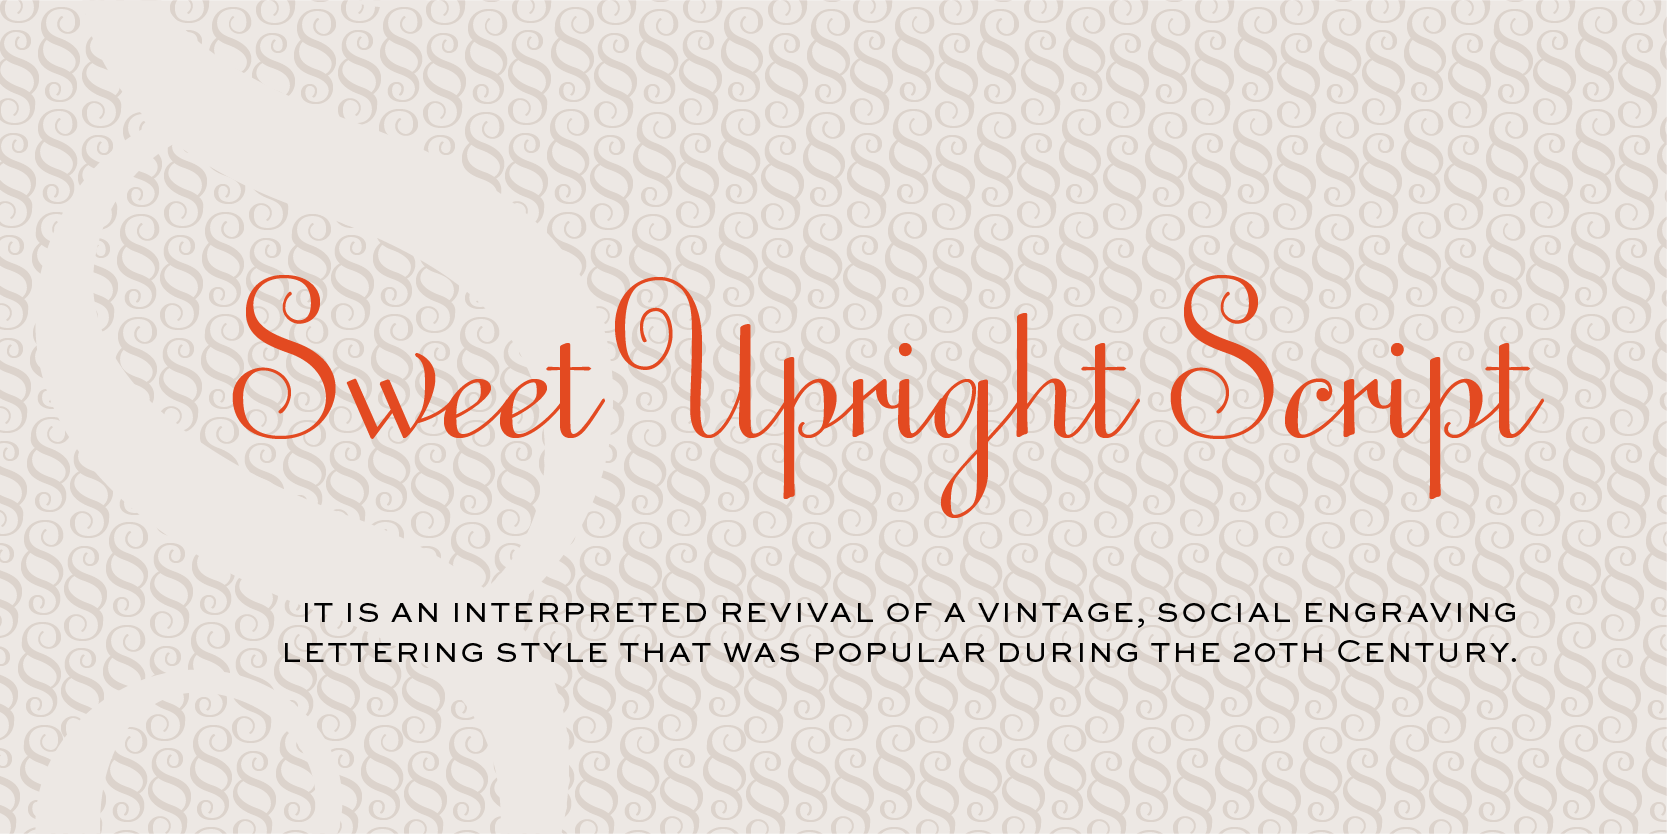 Card displaying Sweet Upright Script typeface in various styles